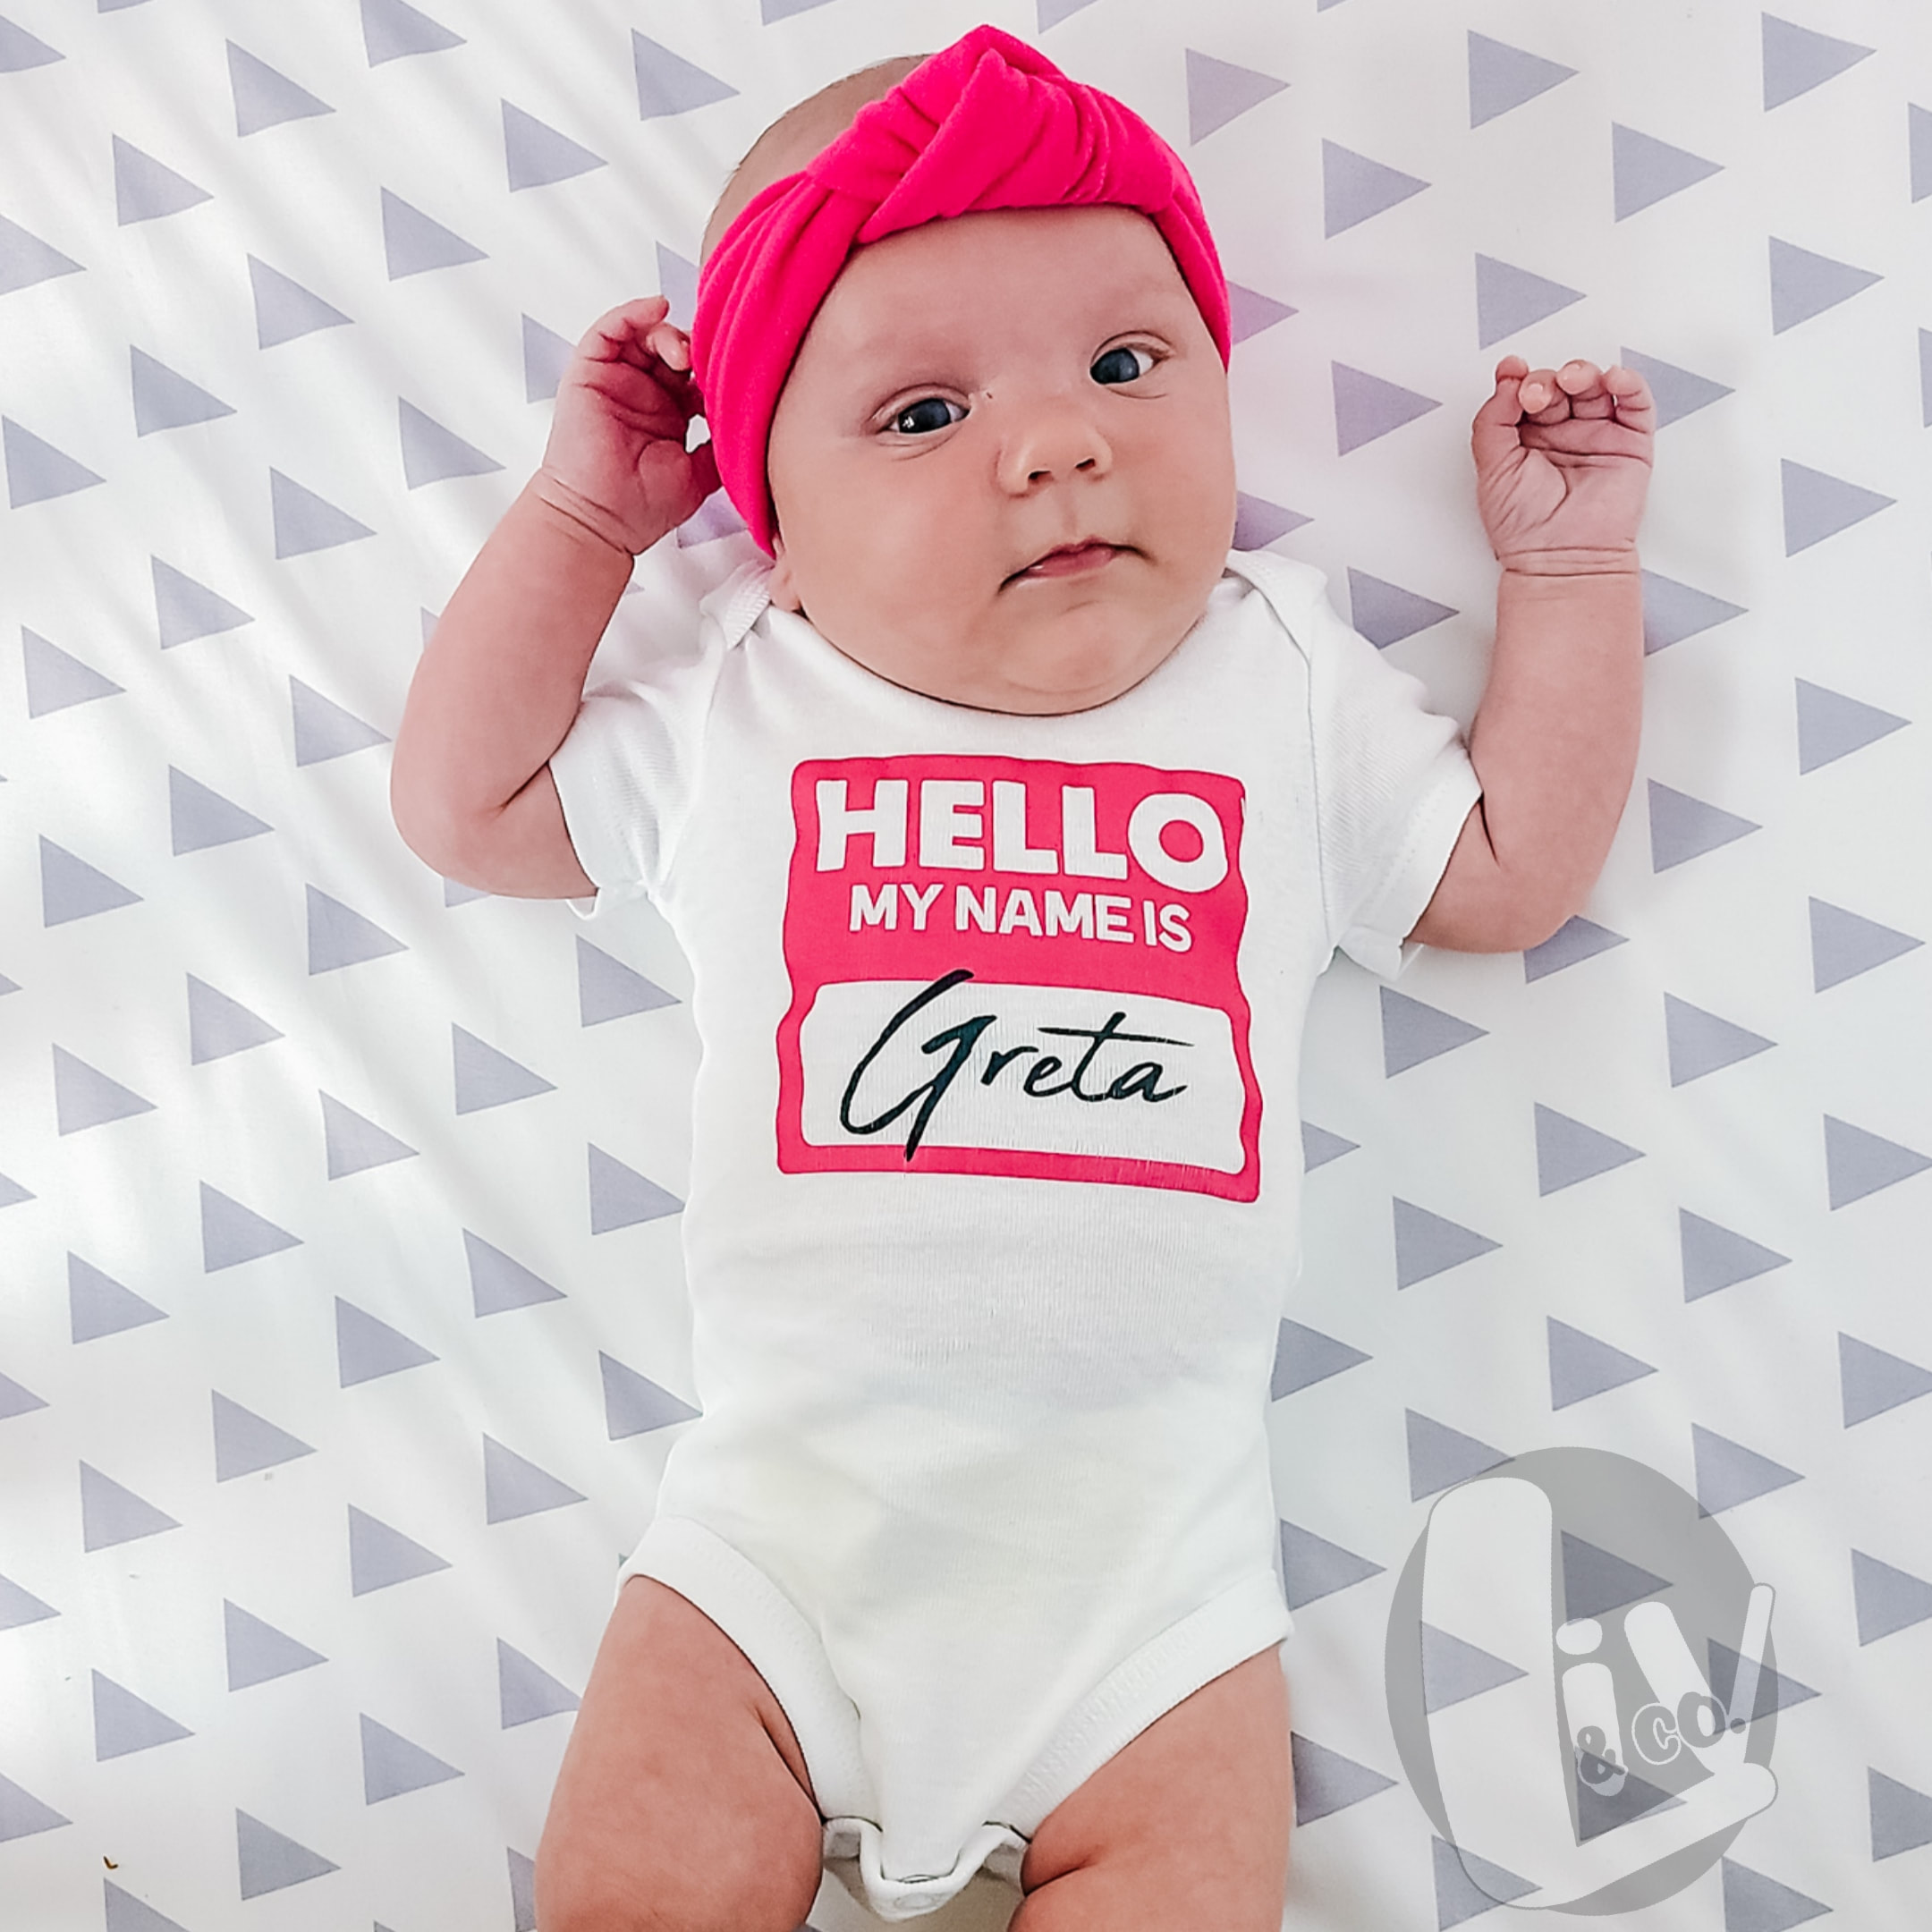 Personalized Baby Name Gold Monogram Announcement Baby Bodysuit Or T-shirt,  Pregnancy Announcement Shirt, Gender Reveal Kids Child Shirt